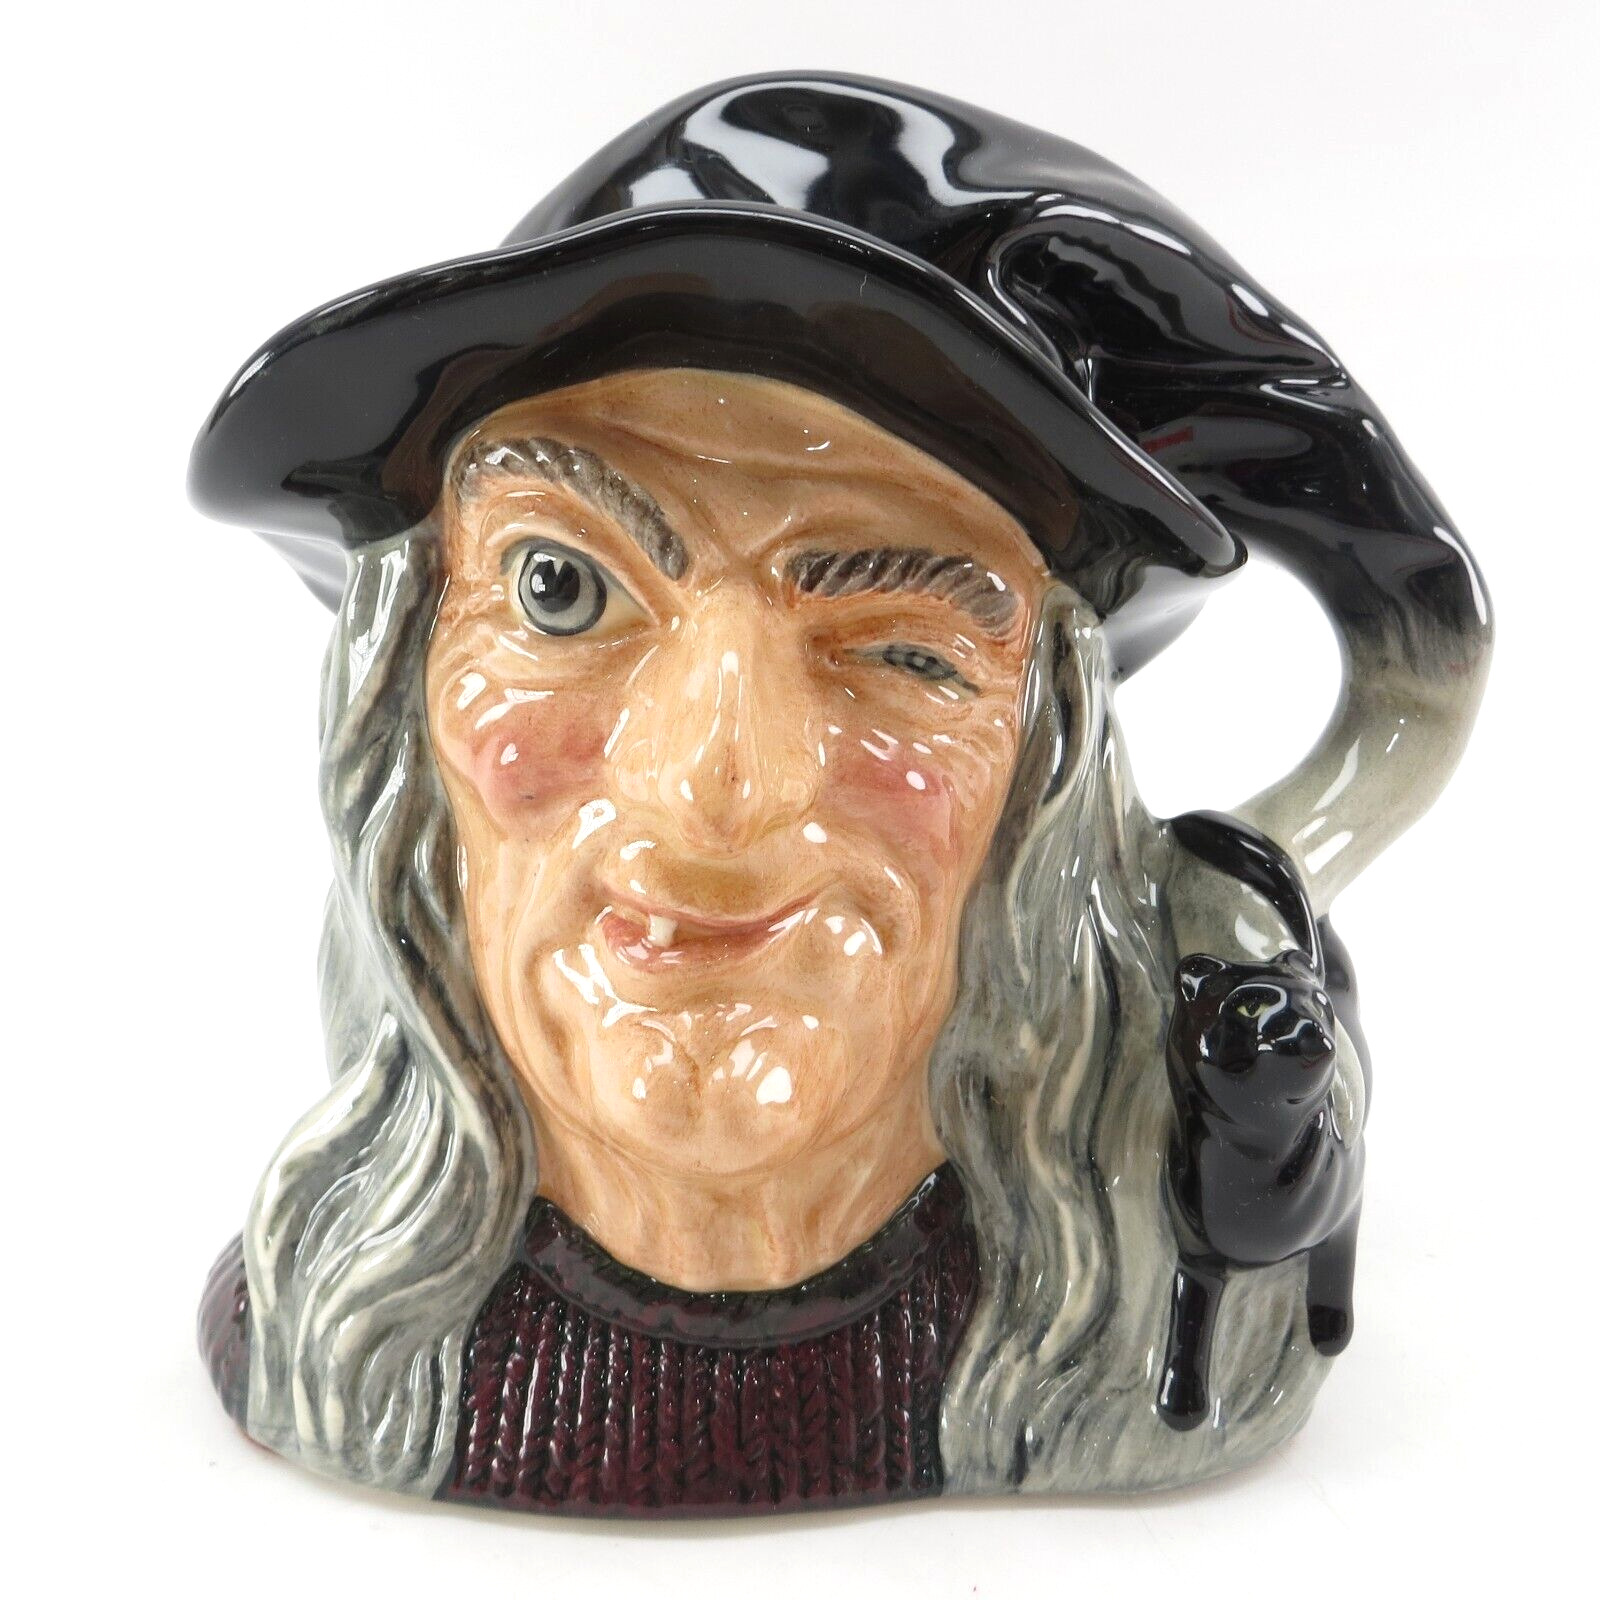 Royal Doulton D6893 THE WITCH Character Toby Jug Figurine 1991 LARGE